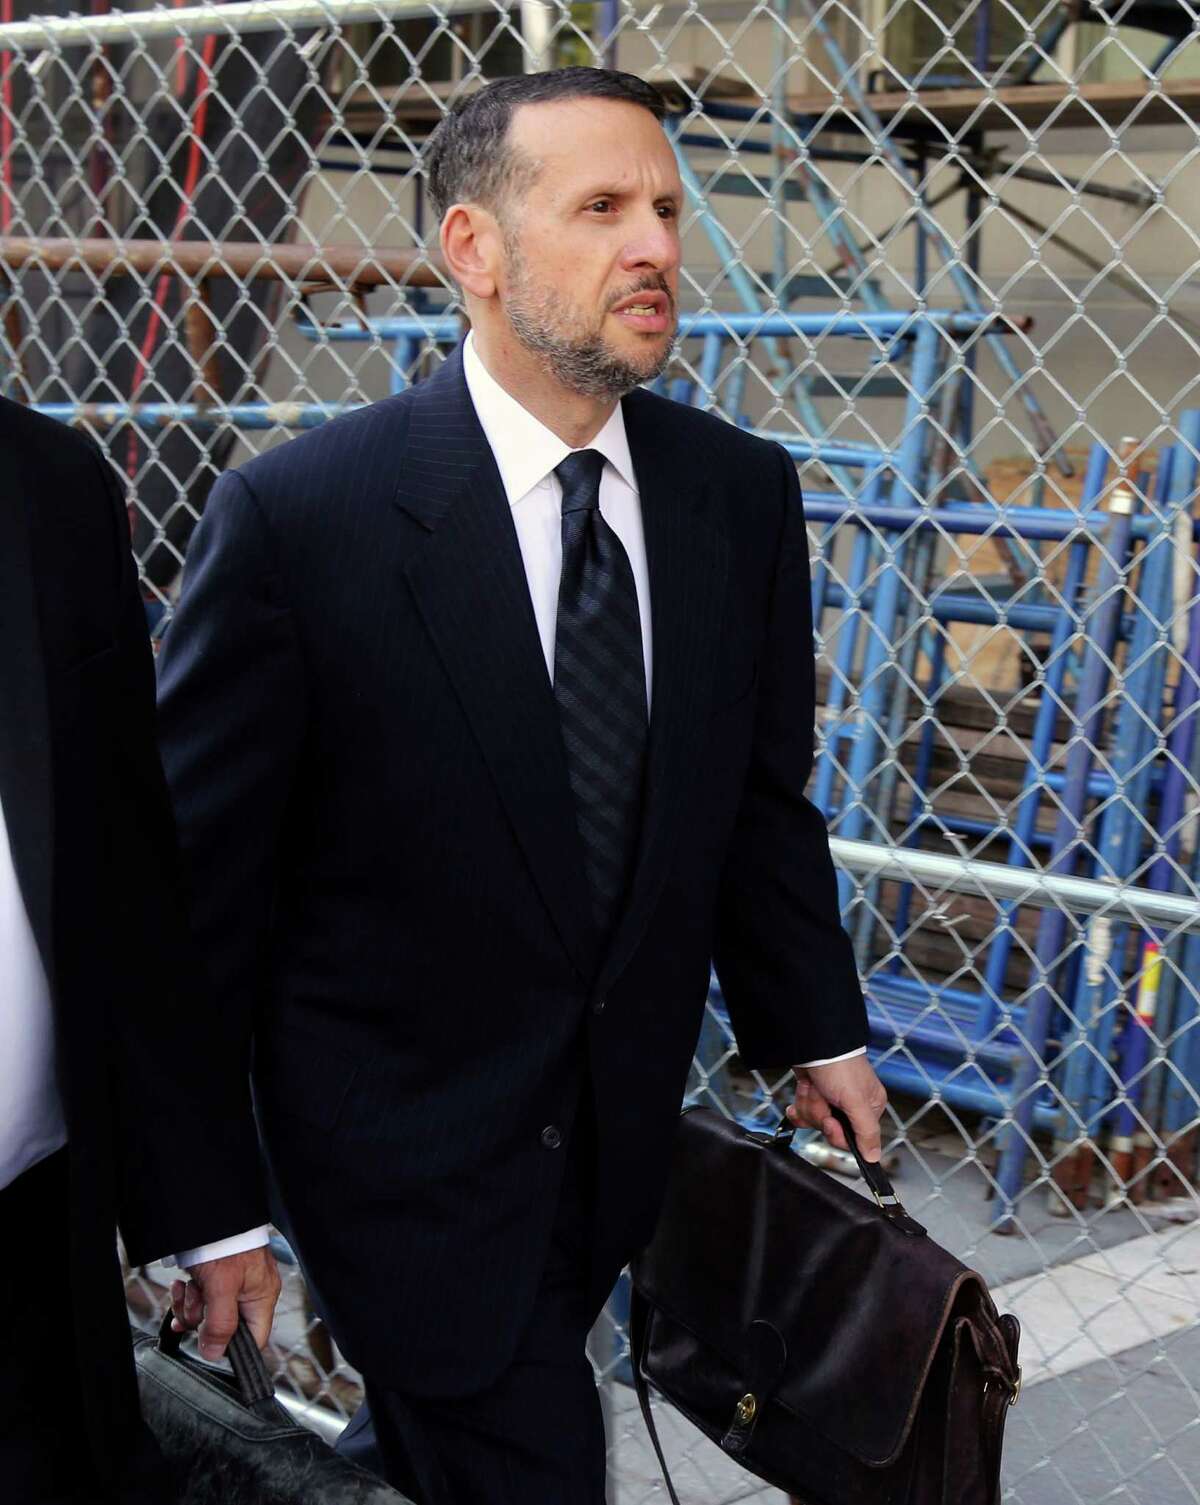 FILE - In a Friday, Sept. 23, 2016 file photo, David Wildstein arrives at the federal courthouse, in Newark, N.J. Wildstein testified Tuesday, Oct. 4, 2016, that New Jersey Gov. Chris Christie and New York Gov. Andrew Cuomo discussed releasing a false report to tamp down questions over the George Washington Bridge lane-closure scandal. (Chris Pedota/The Record via AP, File) ORG XMIT: NJHAC501